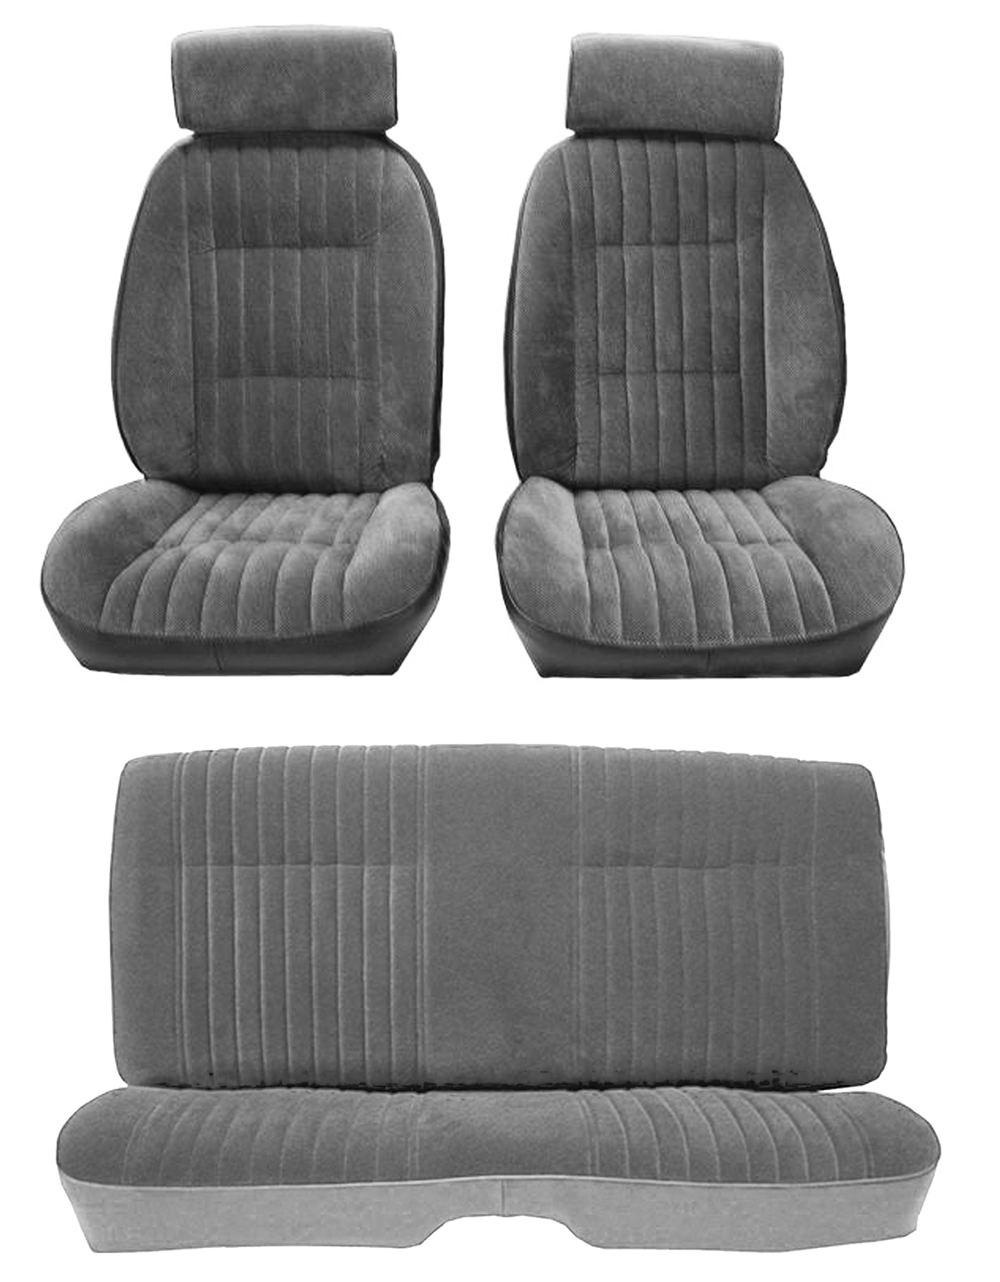 81-88 Monte Carlo SS Front Bucket and Rear Seat Covers Gray Velour w/Vinyl Sides